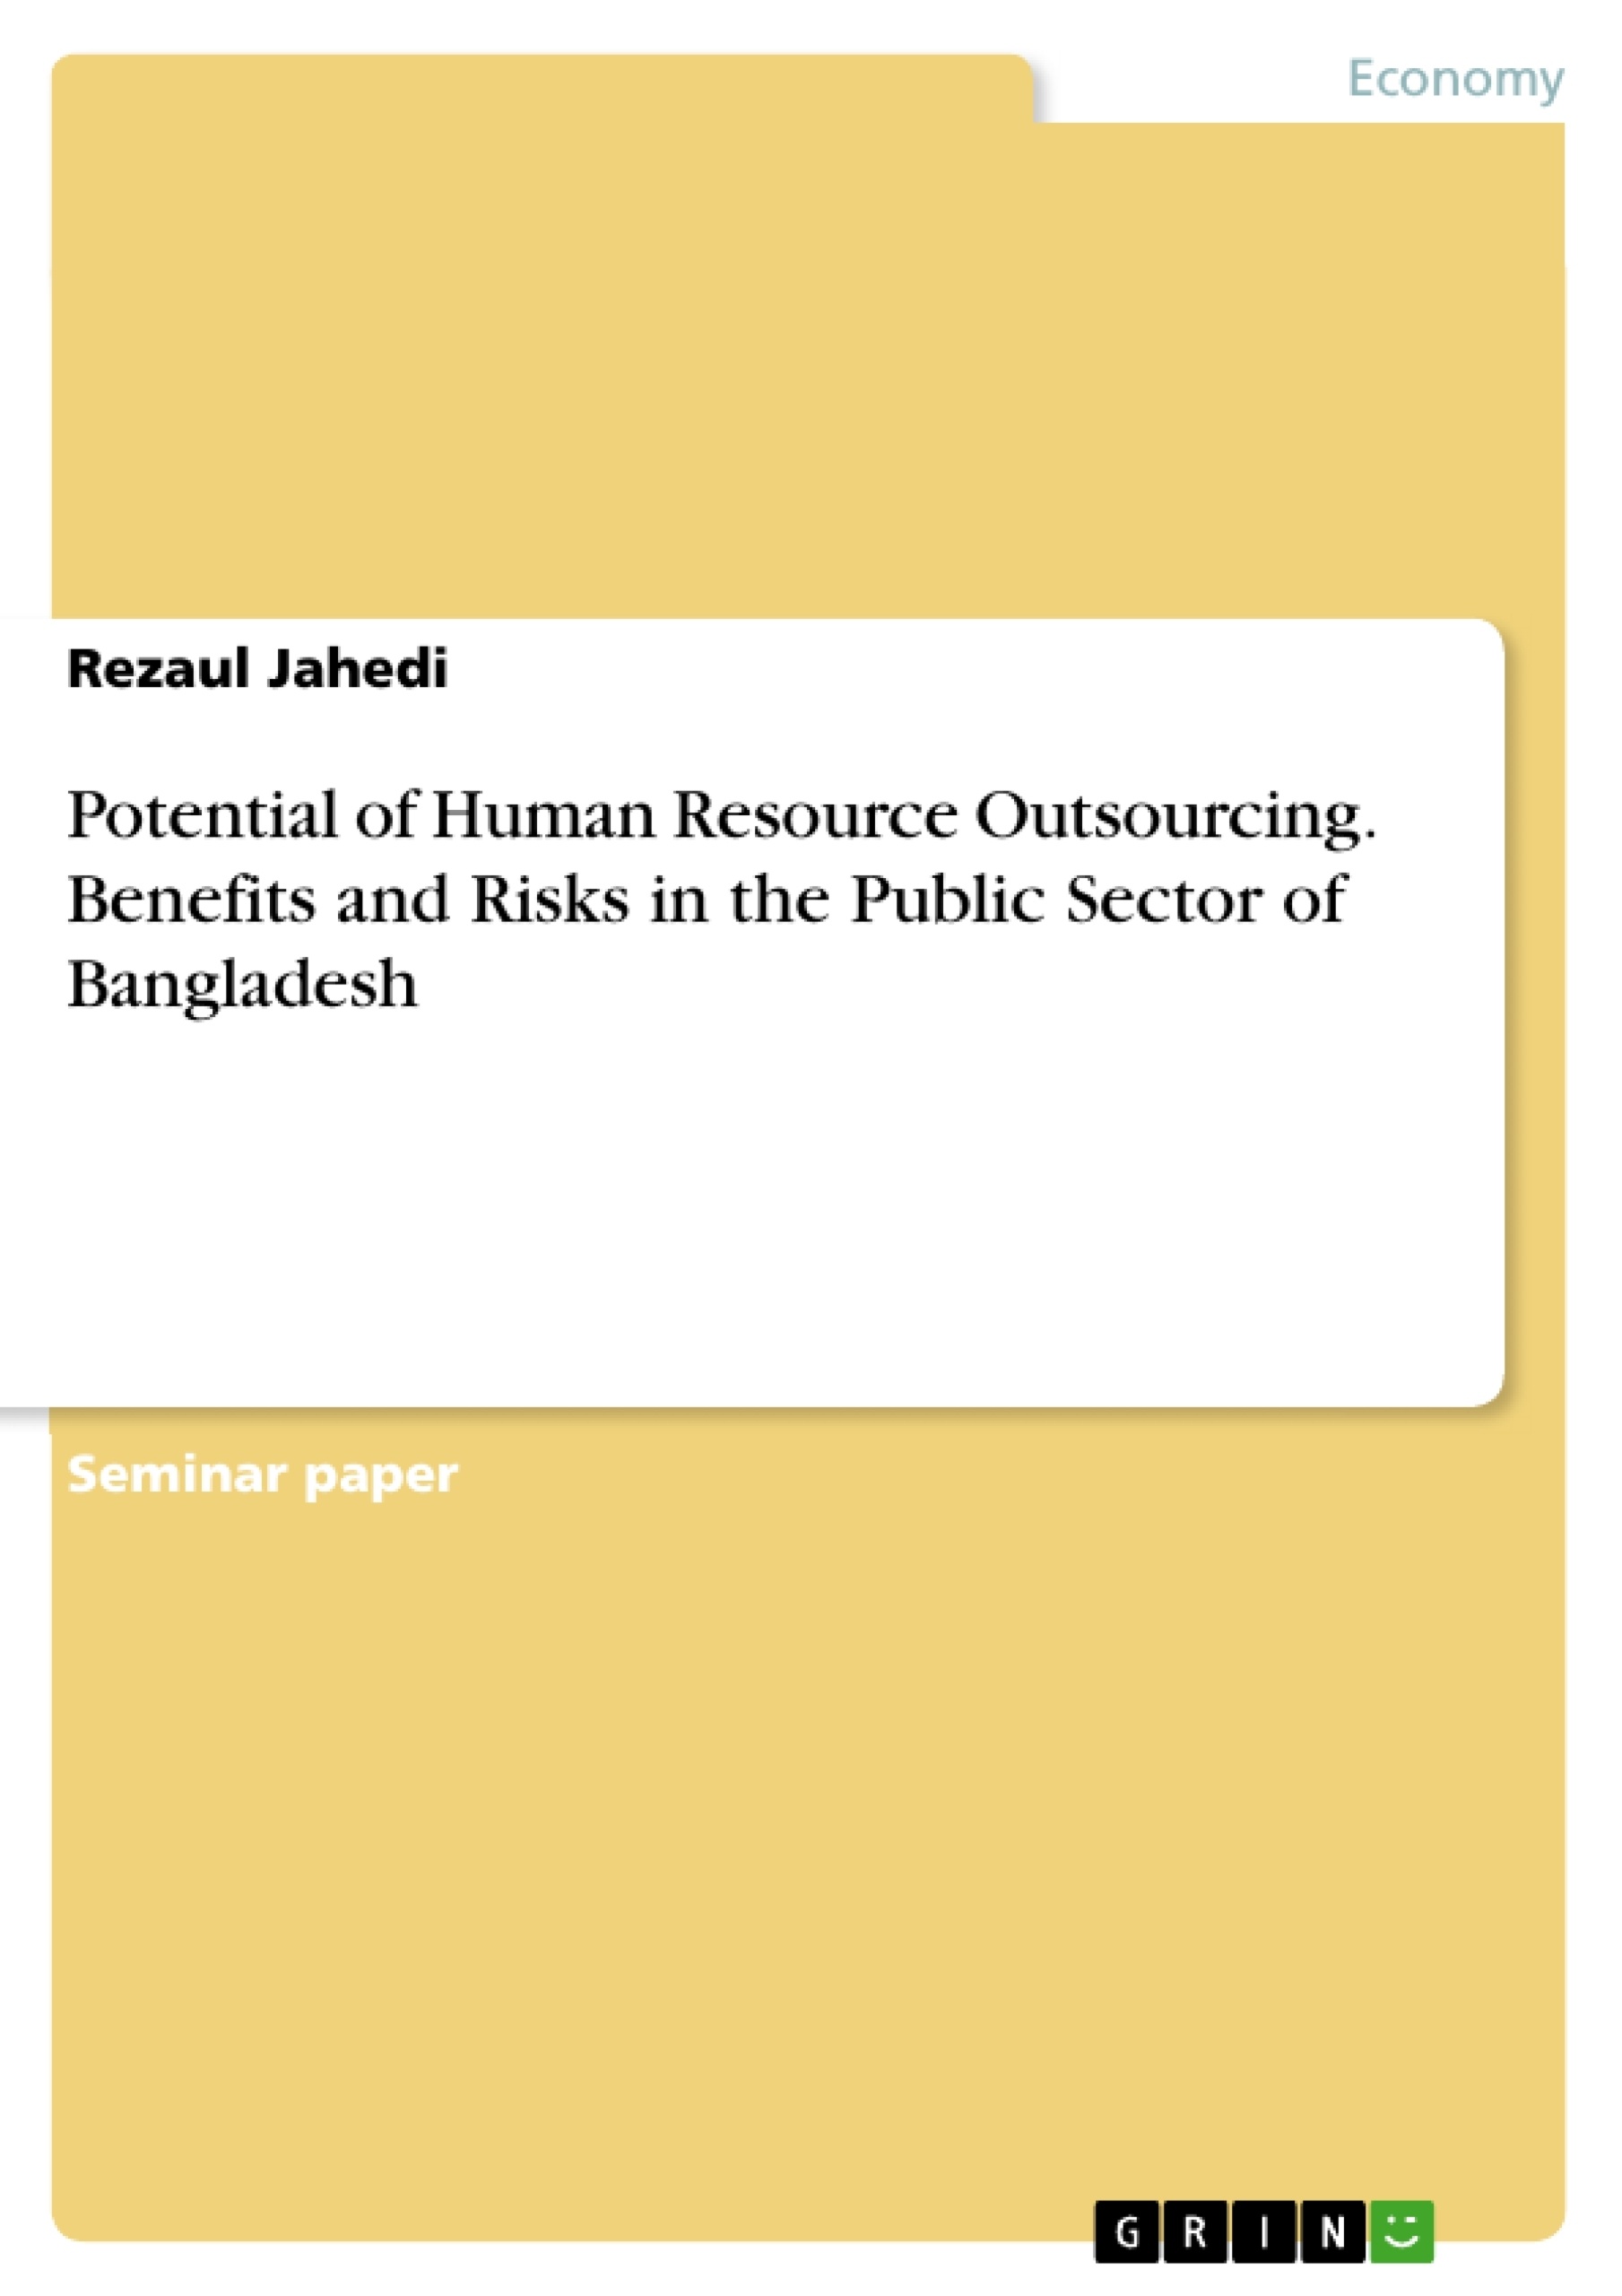 Title: Potential of Human Resource Outsourcing. Benefits and Risks in the Public Sector of Bangladesh